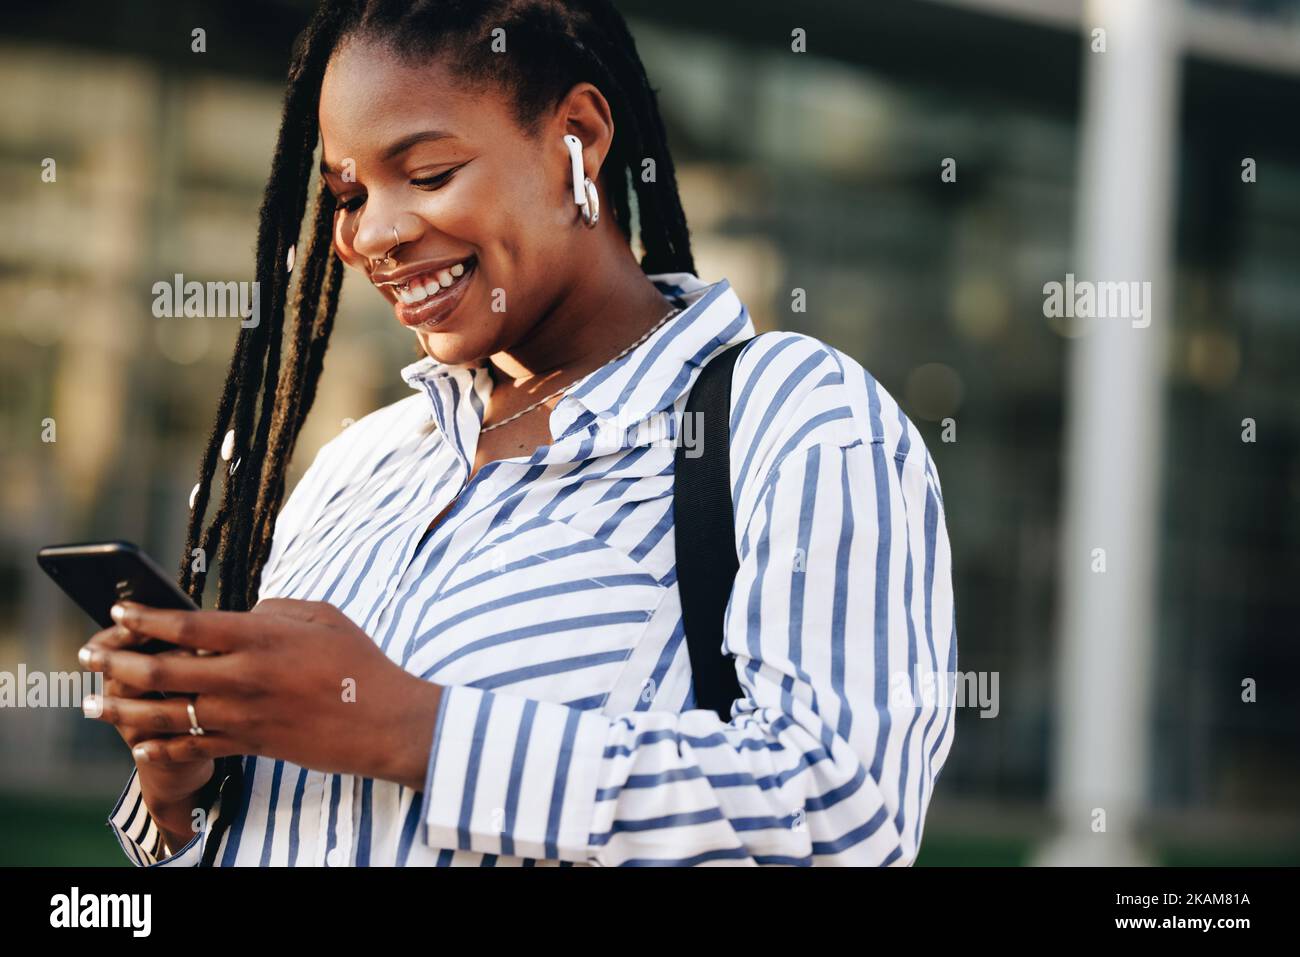 Cheerful young business woman using a smartphone on her way to work in the city. Happy young businesswoman playing music on her phone while commuting Stock Photo